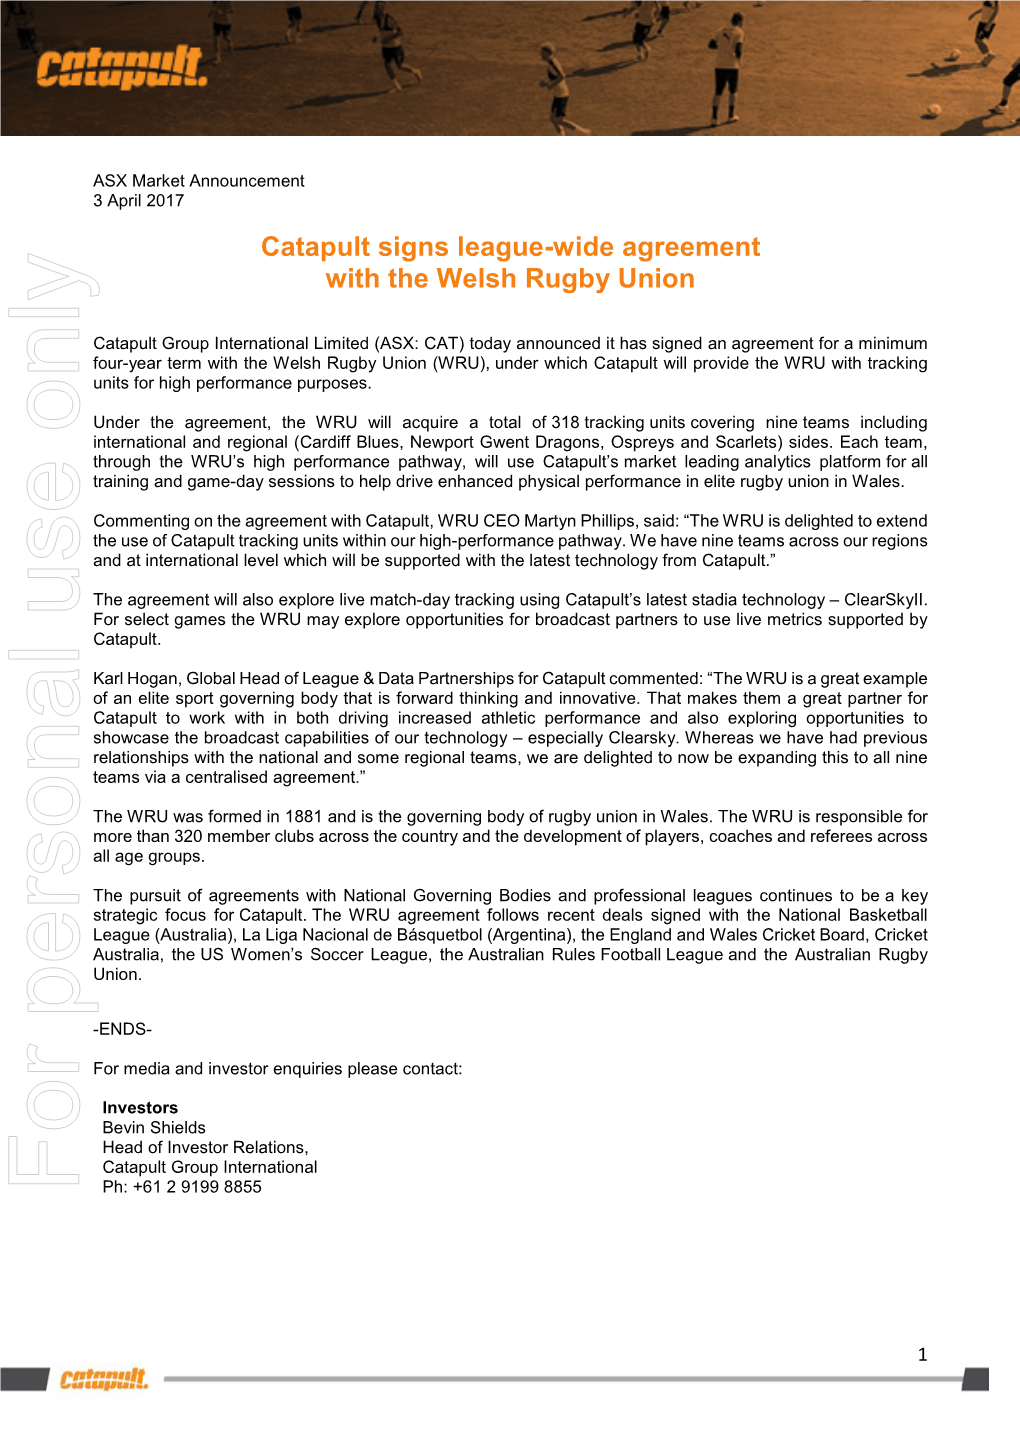 Catapult Signs League-Wide Agreement with the Welsh Rugby Union